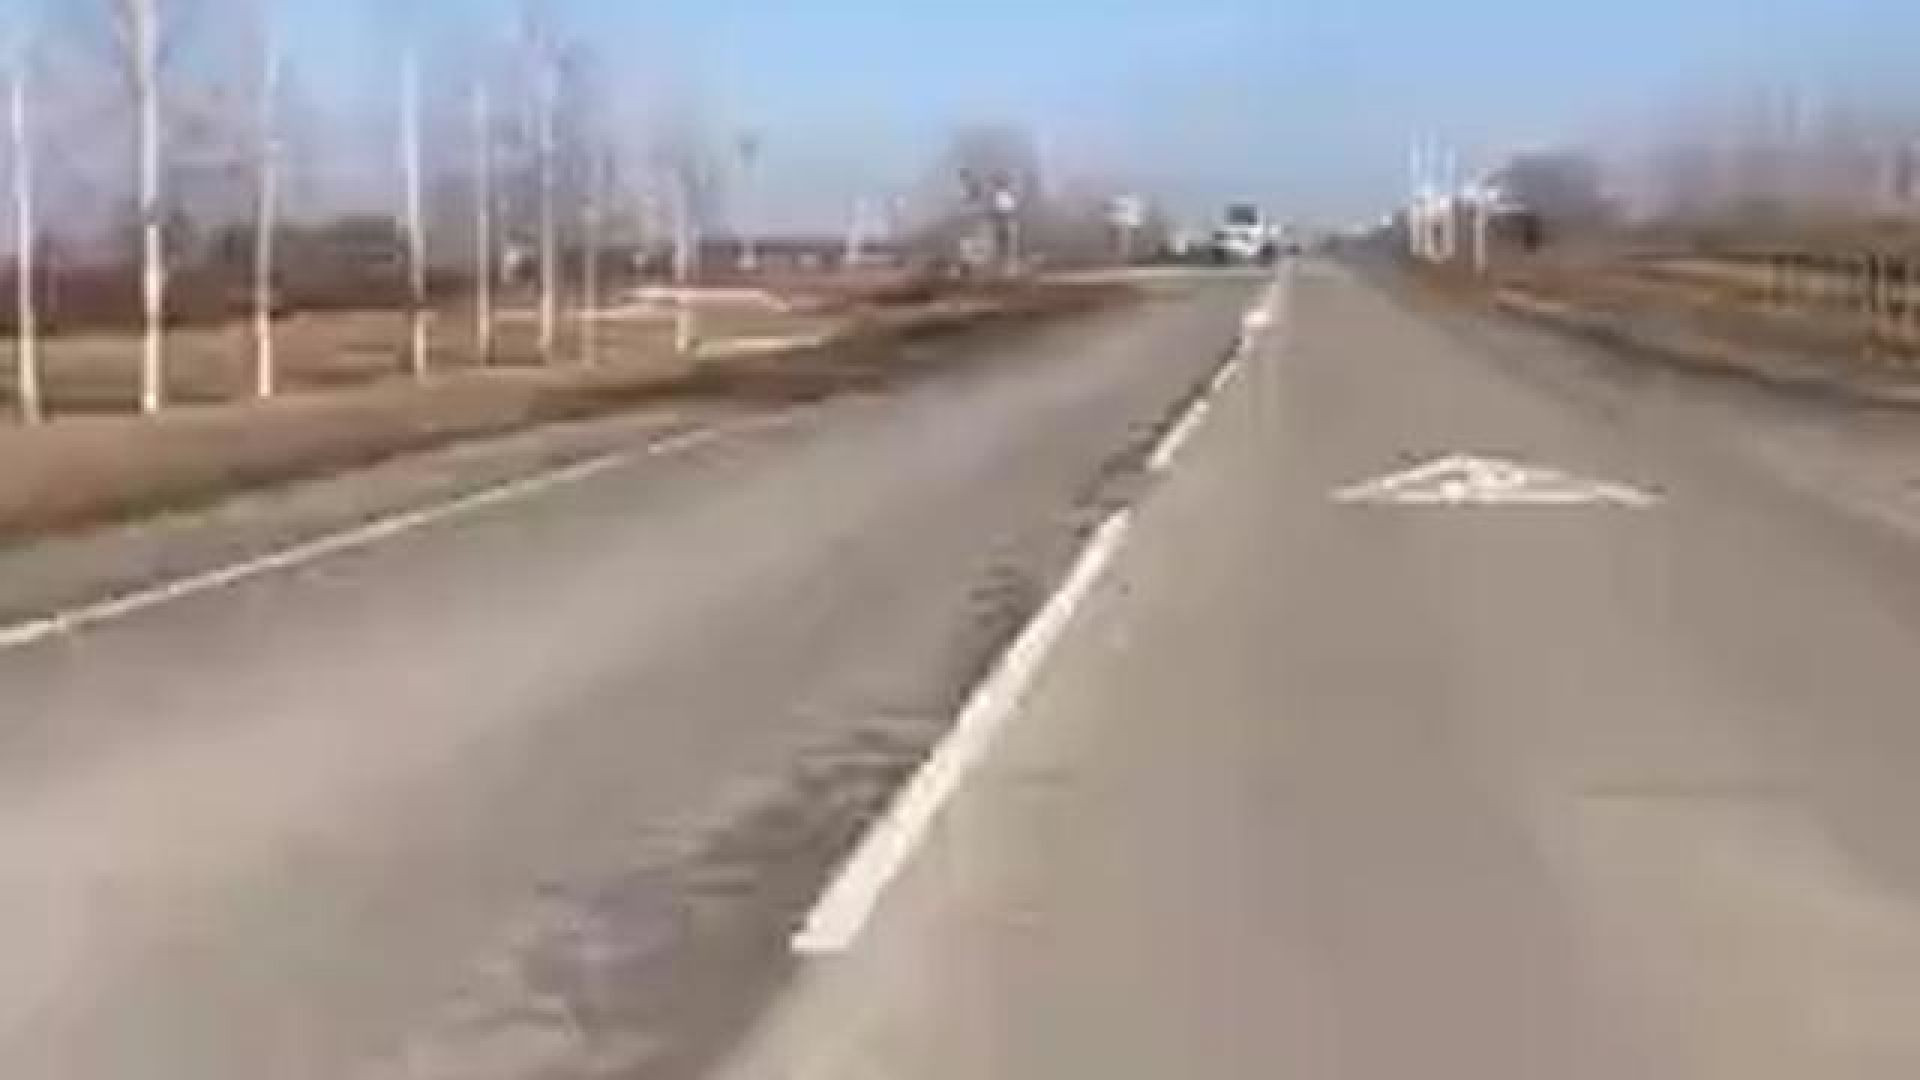 50 RUSSIAN TANKS TWO MILES FROM ENTERING UKRAINE